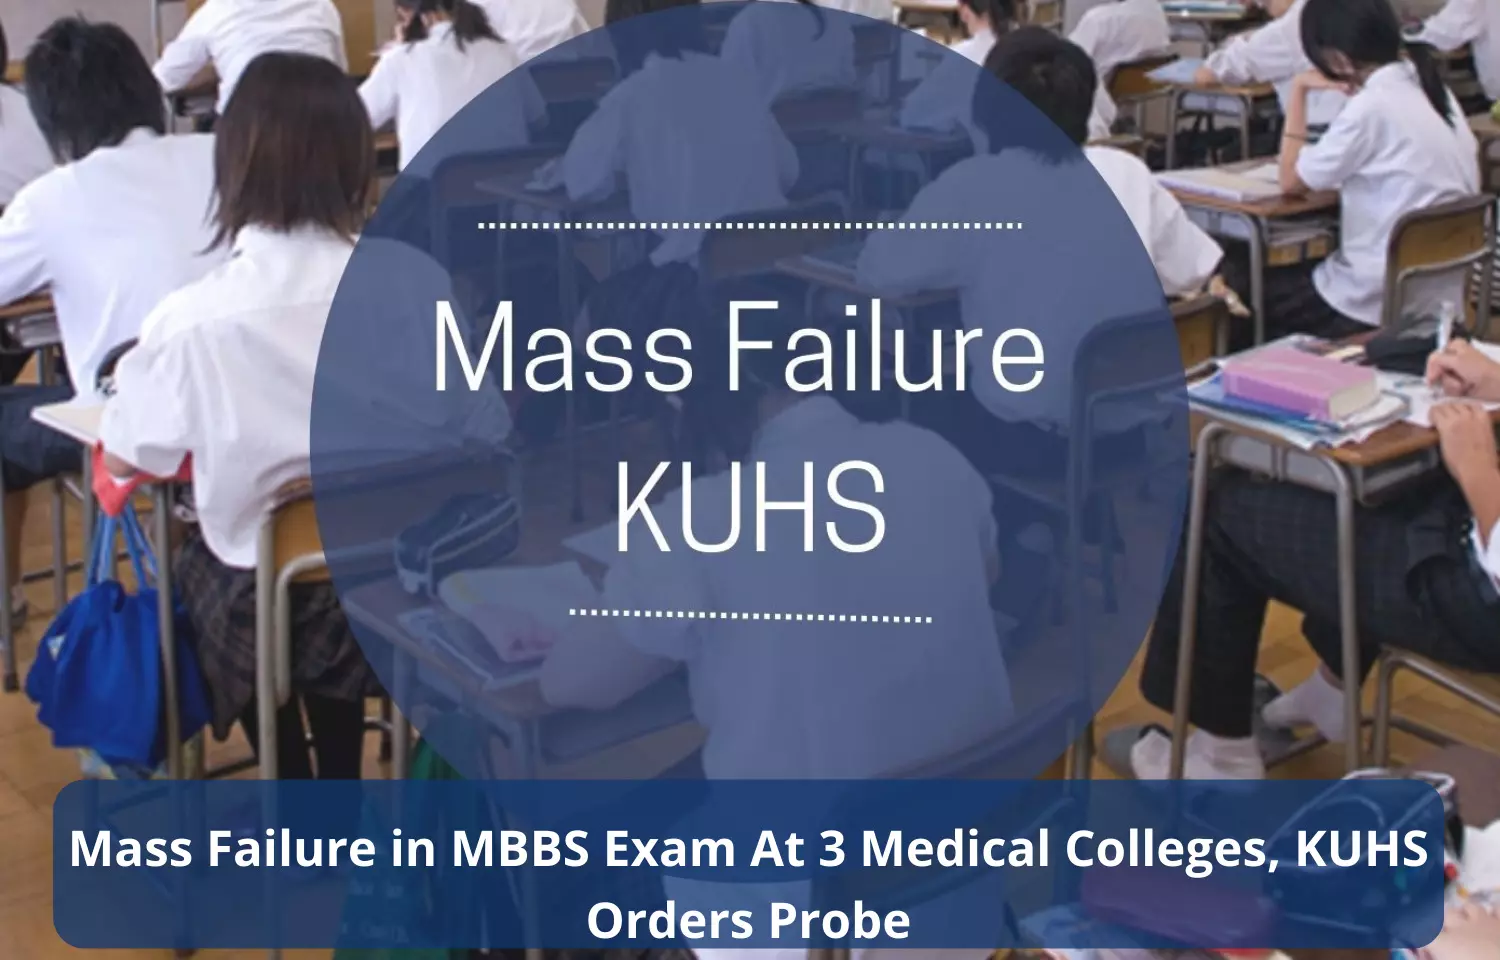 KUHS to investigate mass failure in 3 medical colleges